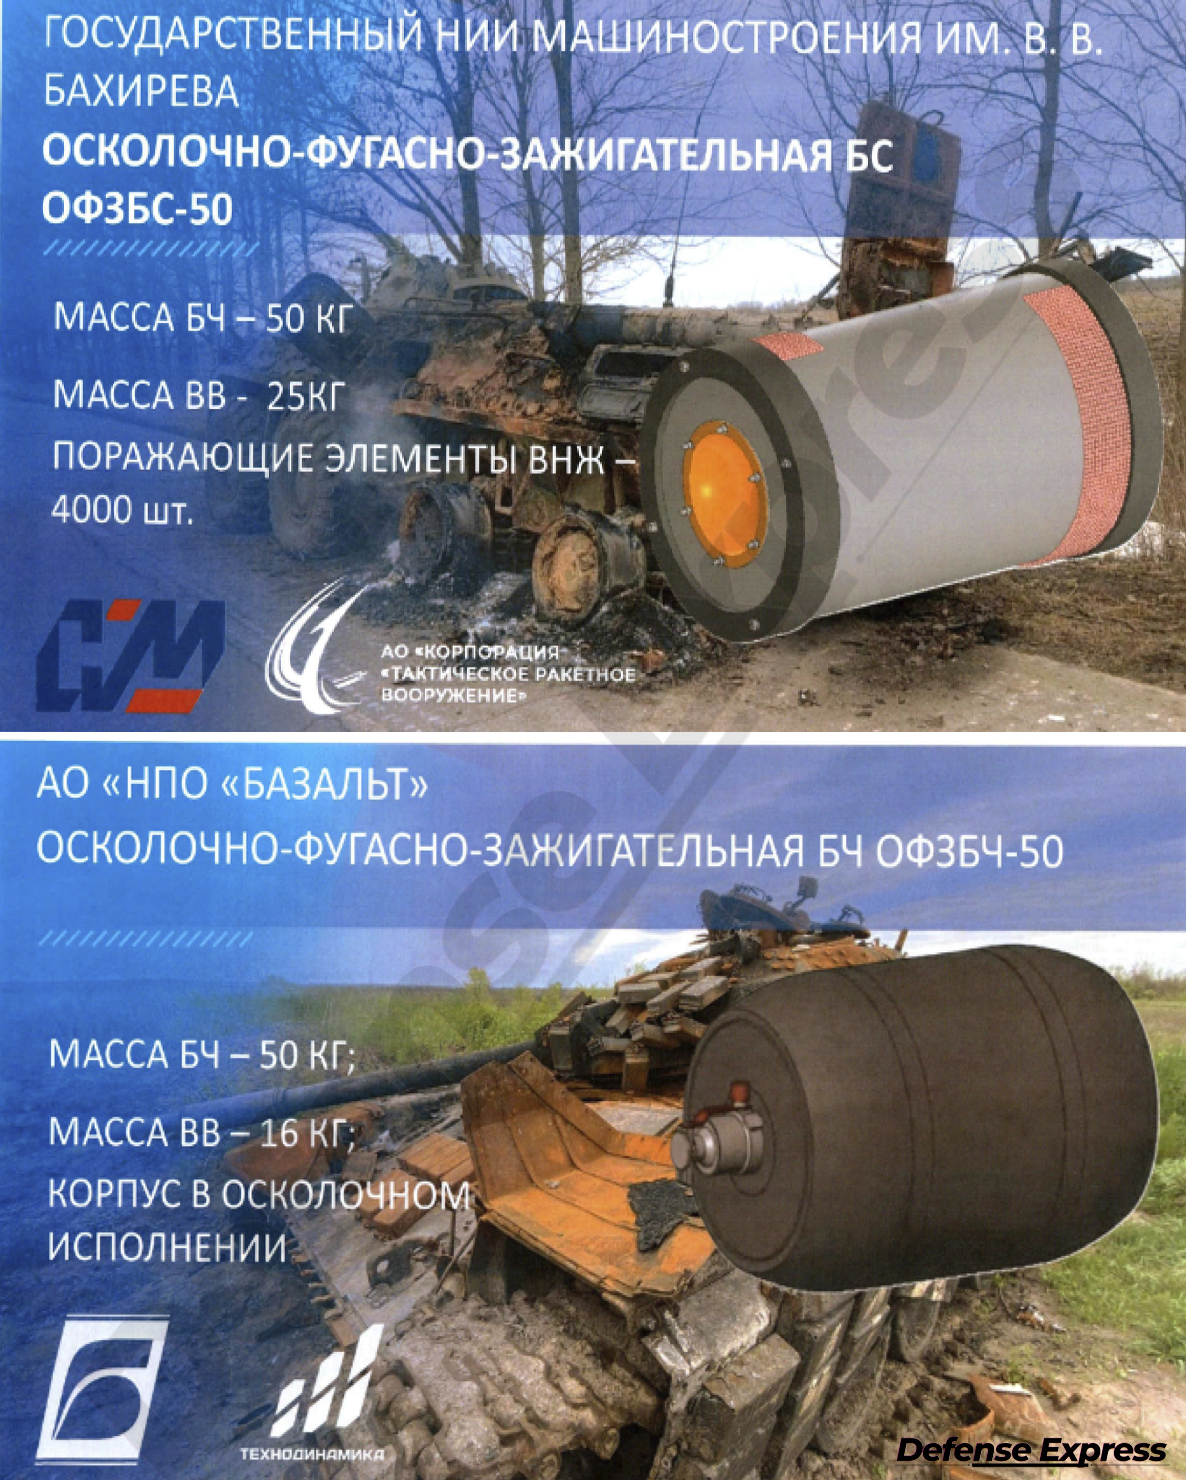 New 50-kg warheads for Shahed-136 / Defense Express / Shahed-136's New 90-kg Warhead and Other Findings of the Alabuga Data Leak